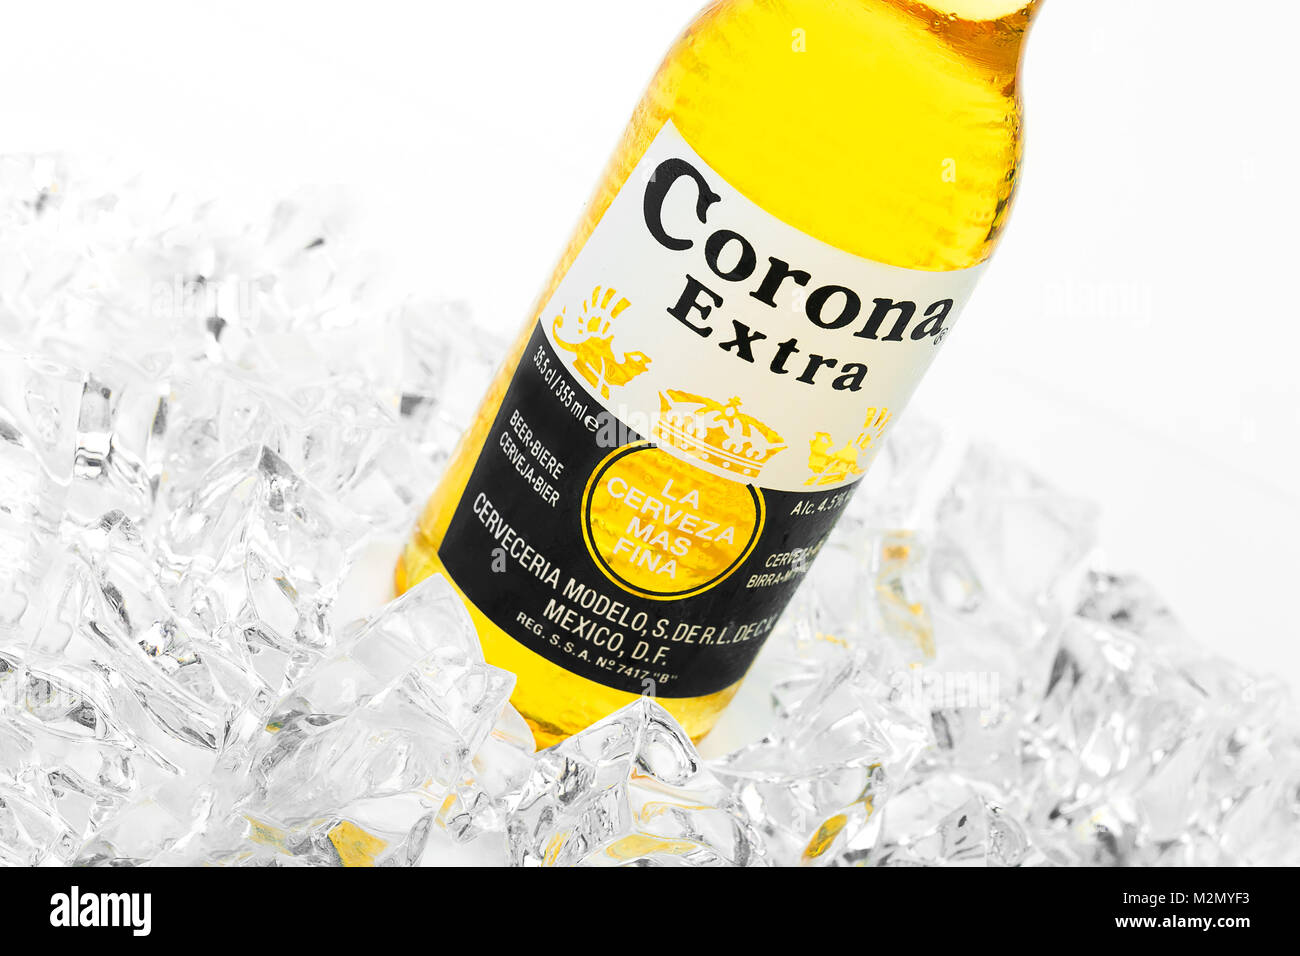 Trieste, Italy - June 23, 2016: Corona Extra is one of the top-selling beers worldwide is a pale lager produced by Cerveceria Modelo in Mexico. Stock Photo